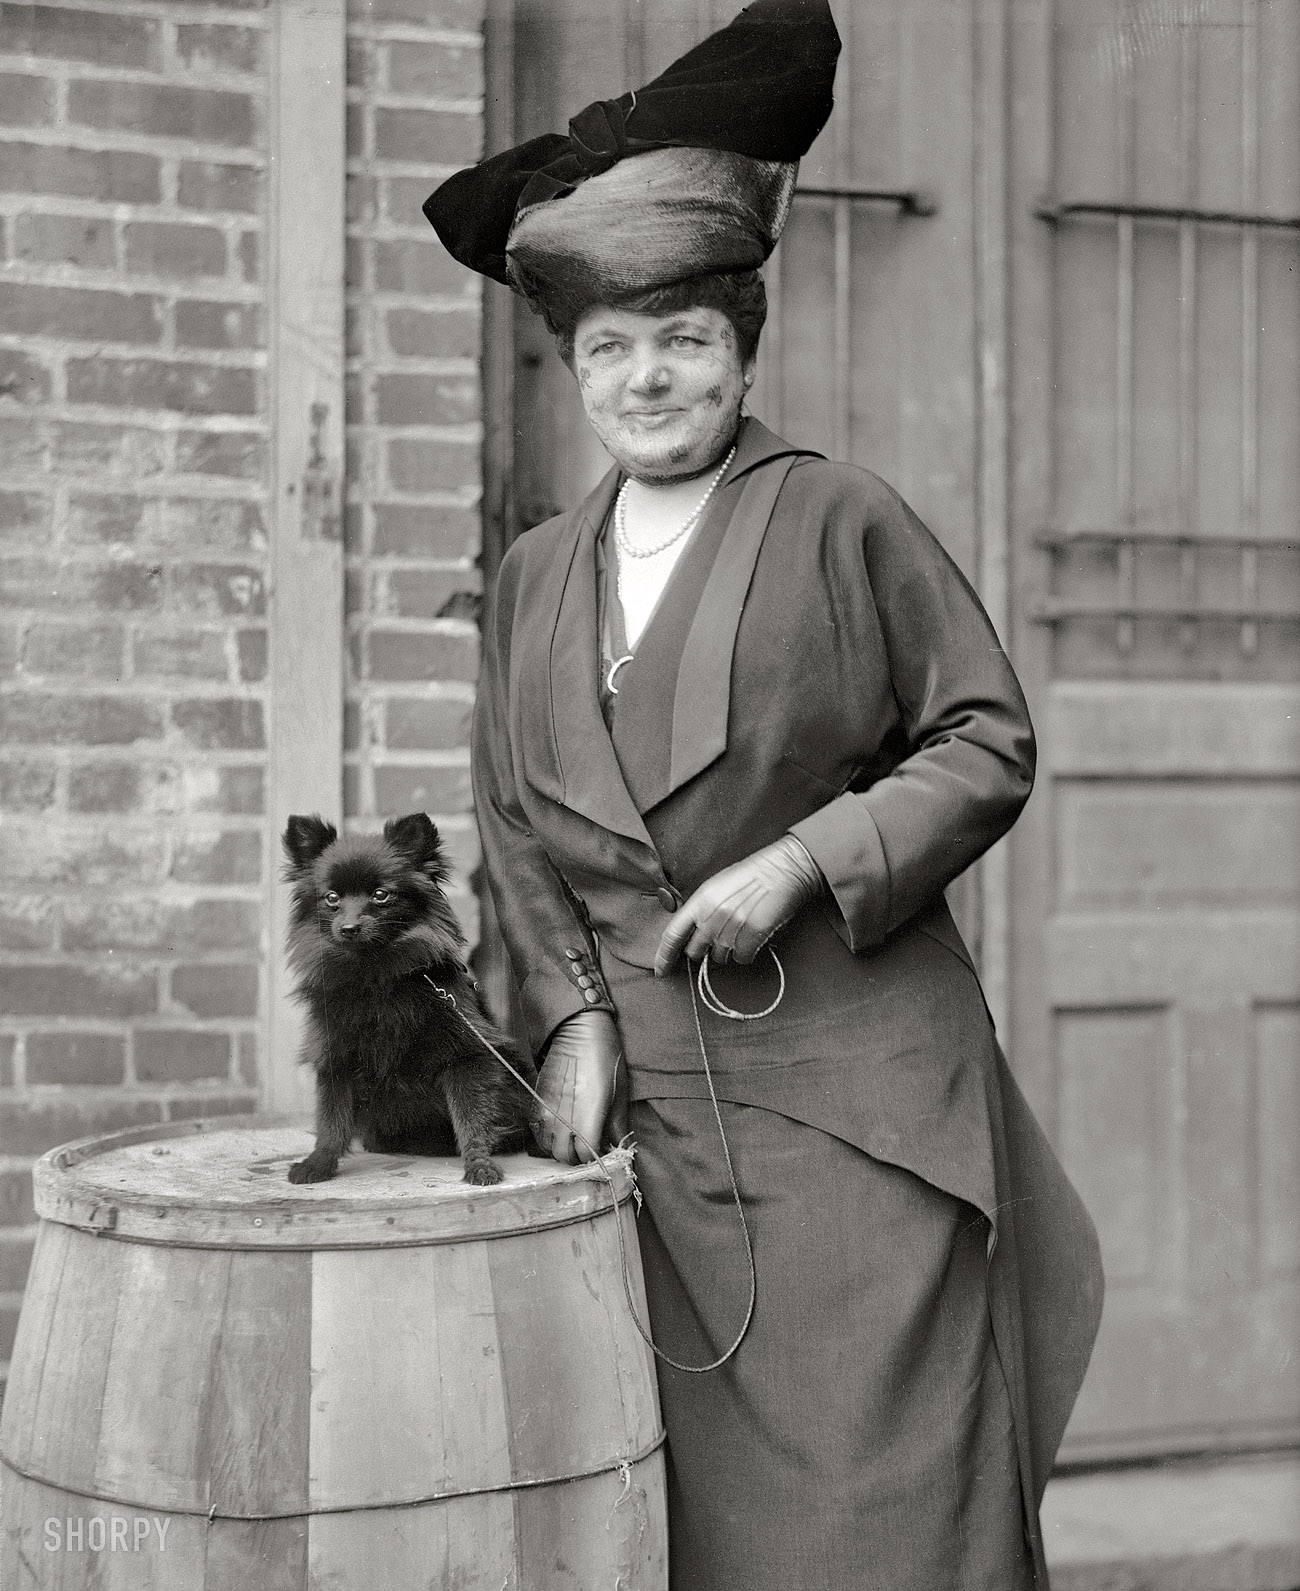 1915. "Mrs. H. Morgan Hill, Dog Show." Another photo from the Washington dog show series of pictures. If you crossed William Wegman and Richard Avedon, this might be the stylistic result. Harris & Ewing glass negative. View full size.